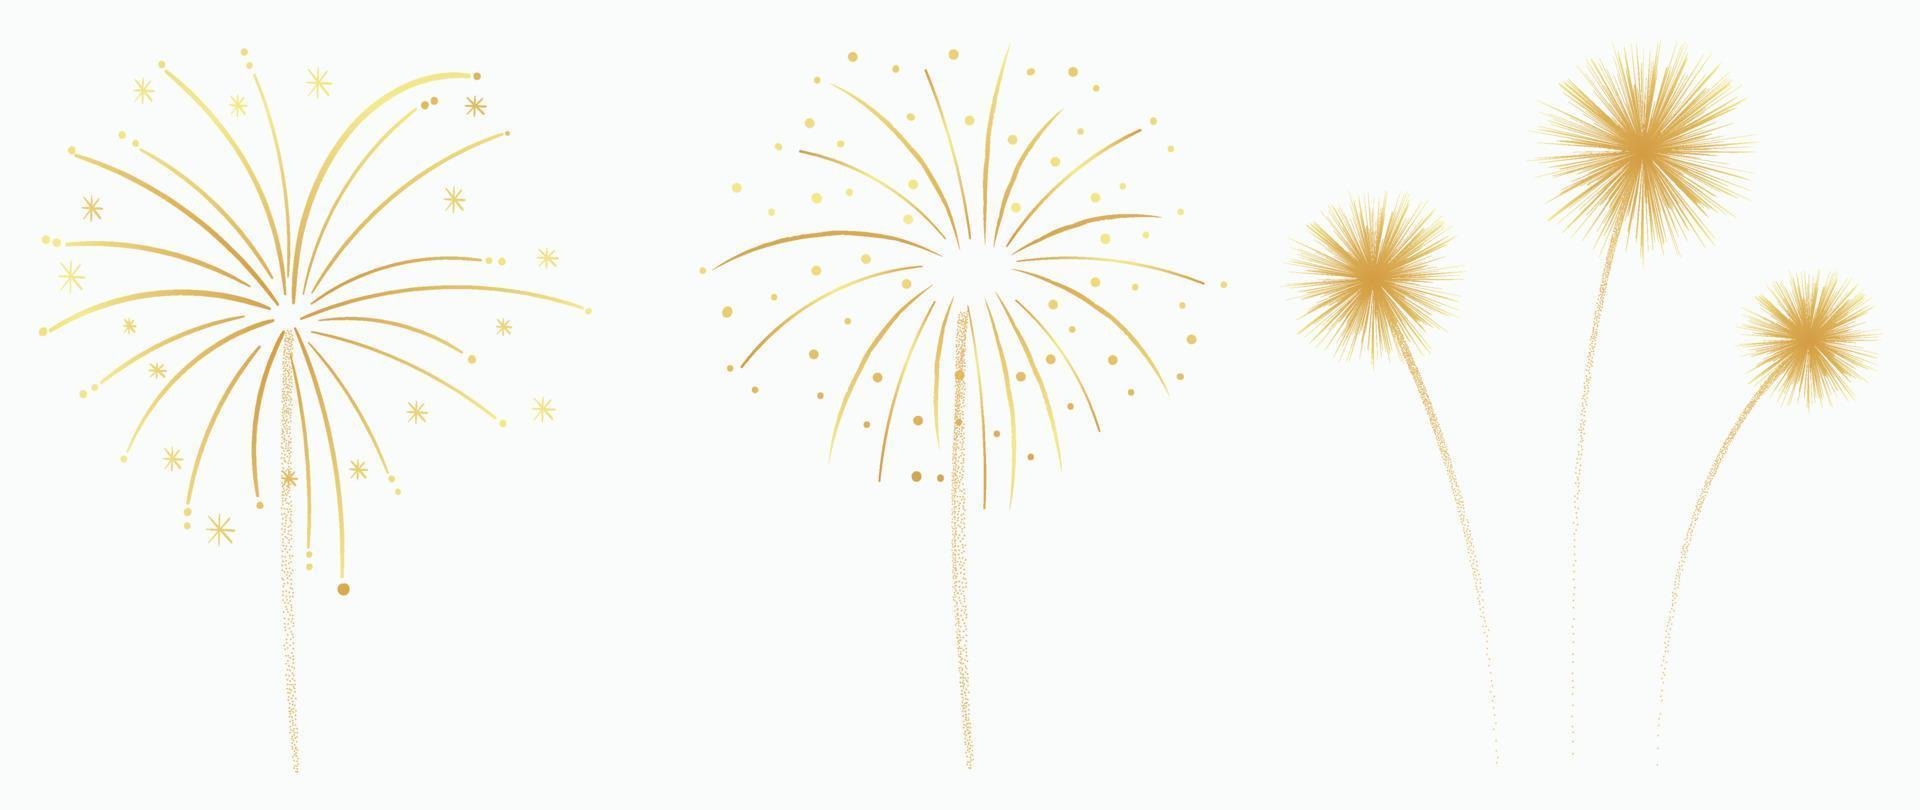 Set of new year festive firework vector illustration. Collection of gradient gold fireworks on white background. Art design suitable for decoration, print, poster, banner, wallpaper, card, cover.